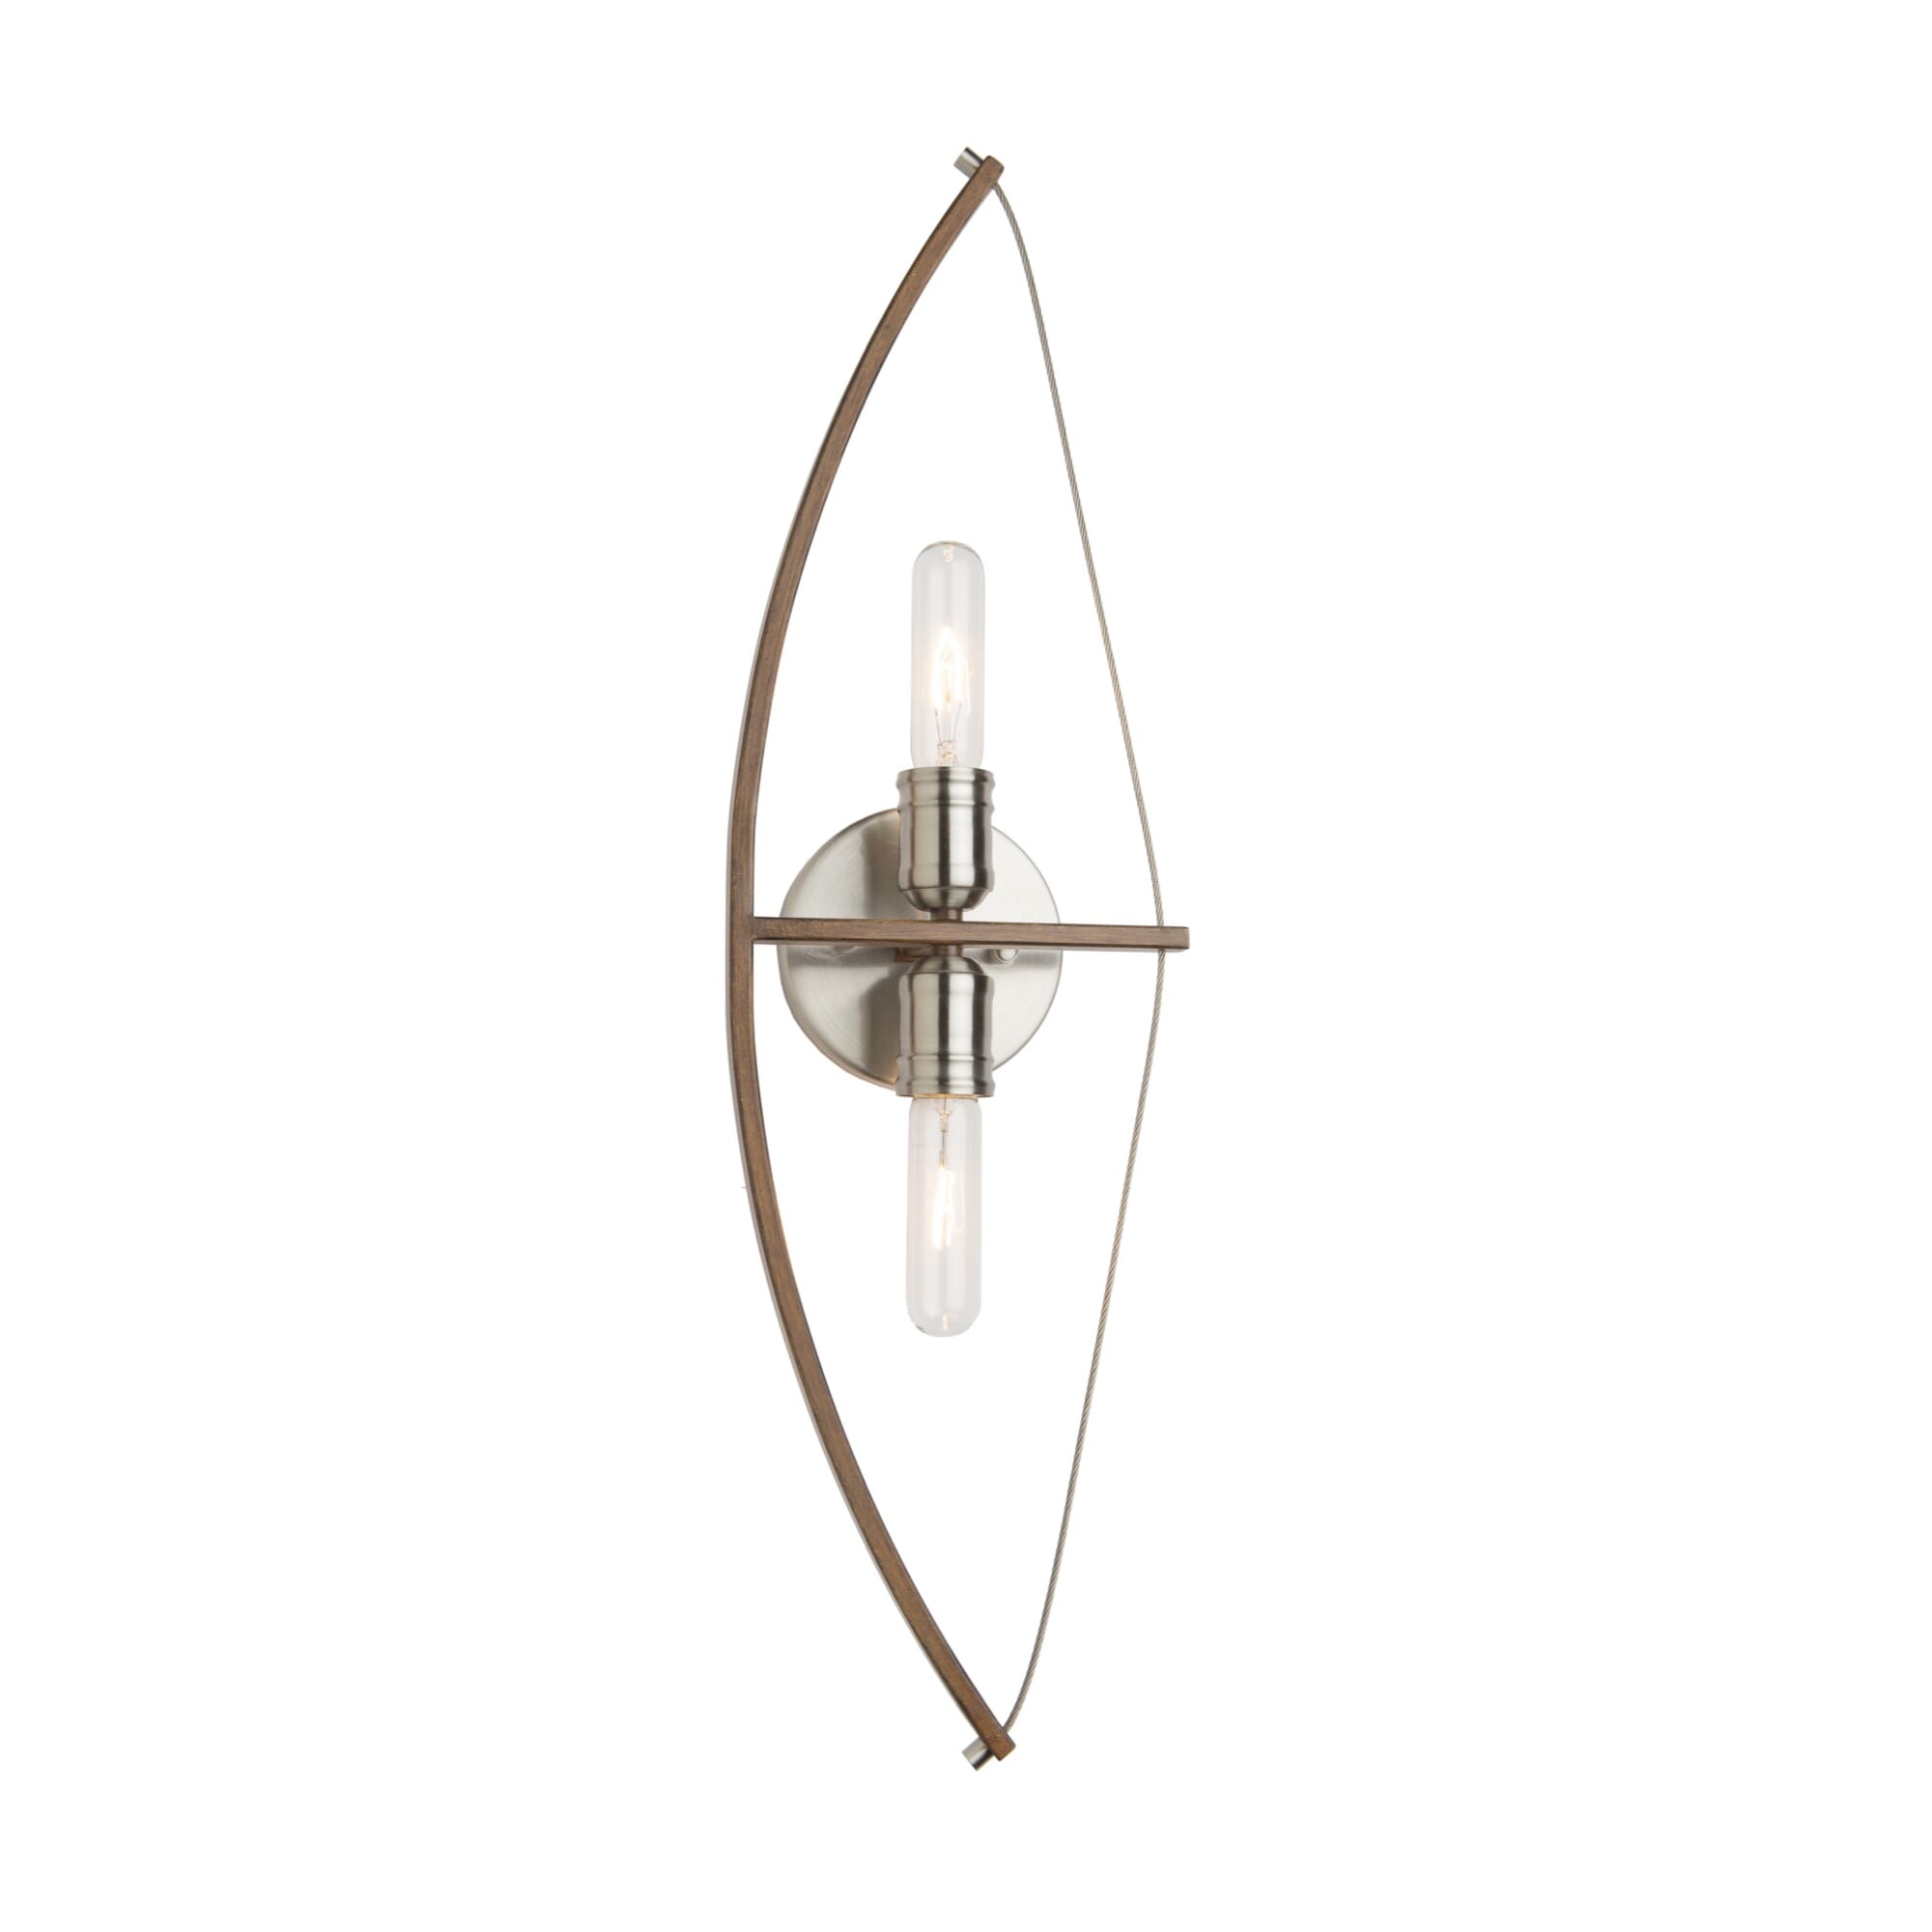 Artcraft Arco 2-Light Wall Sconce in Faux Wood & Brushed Nickel